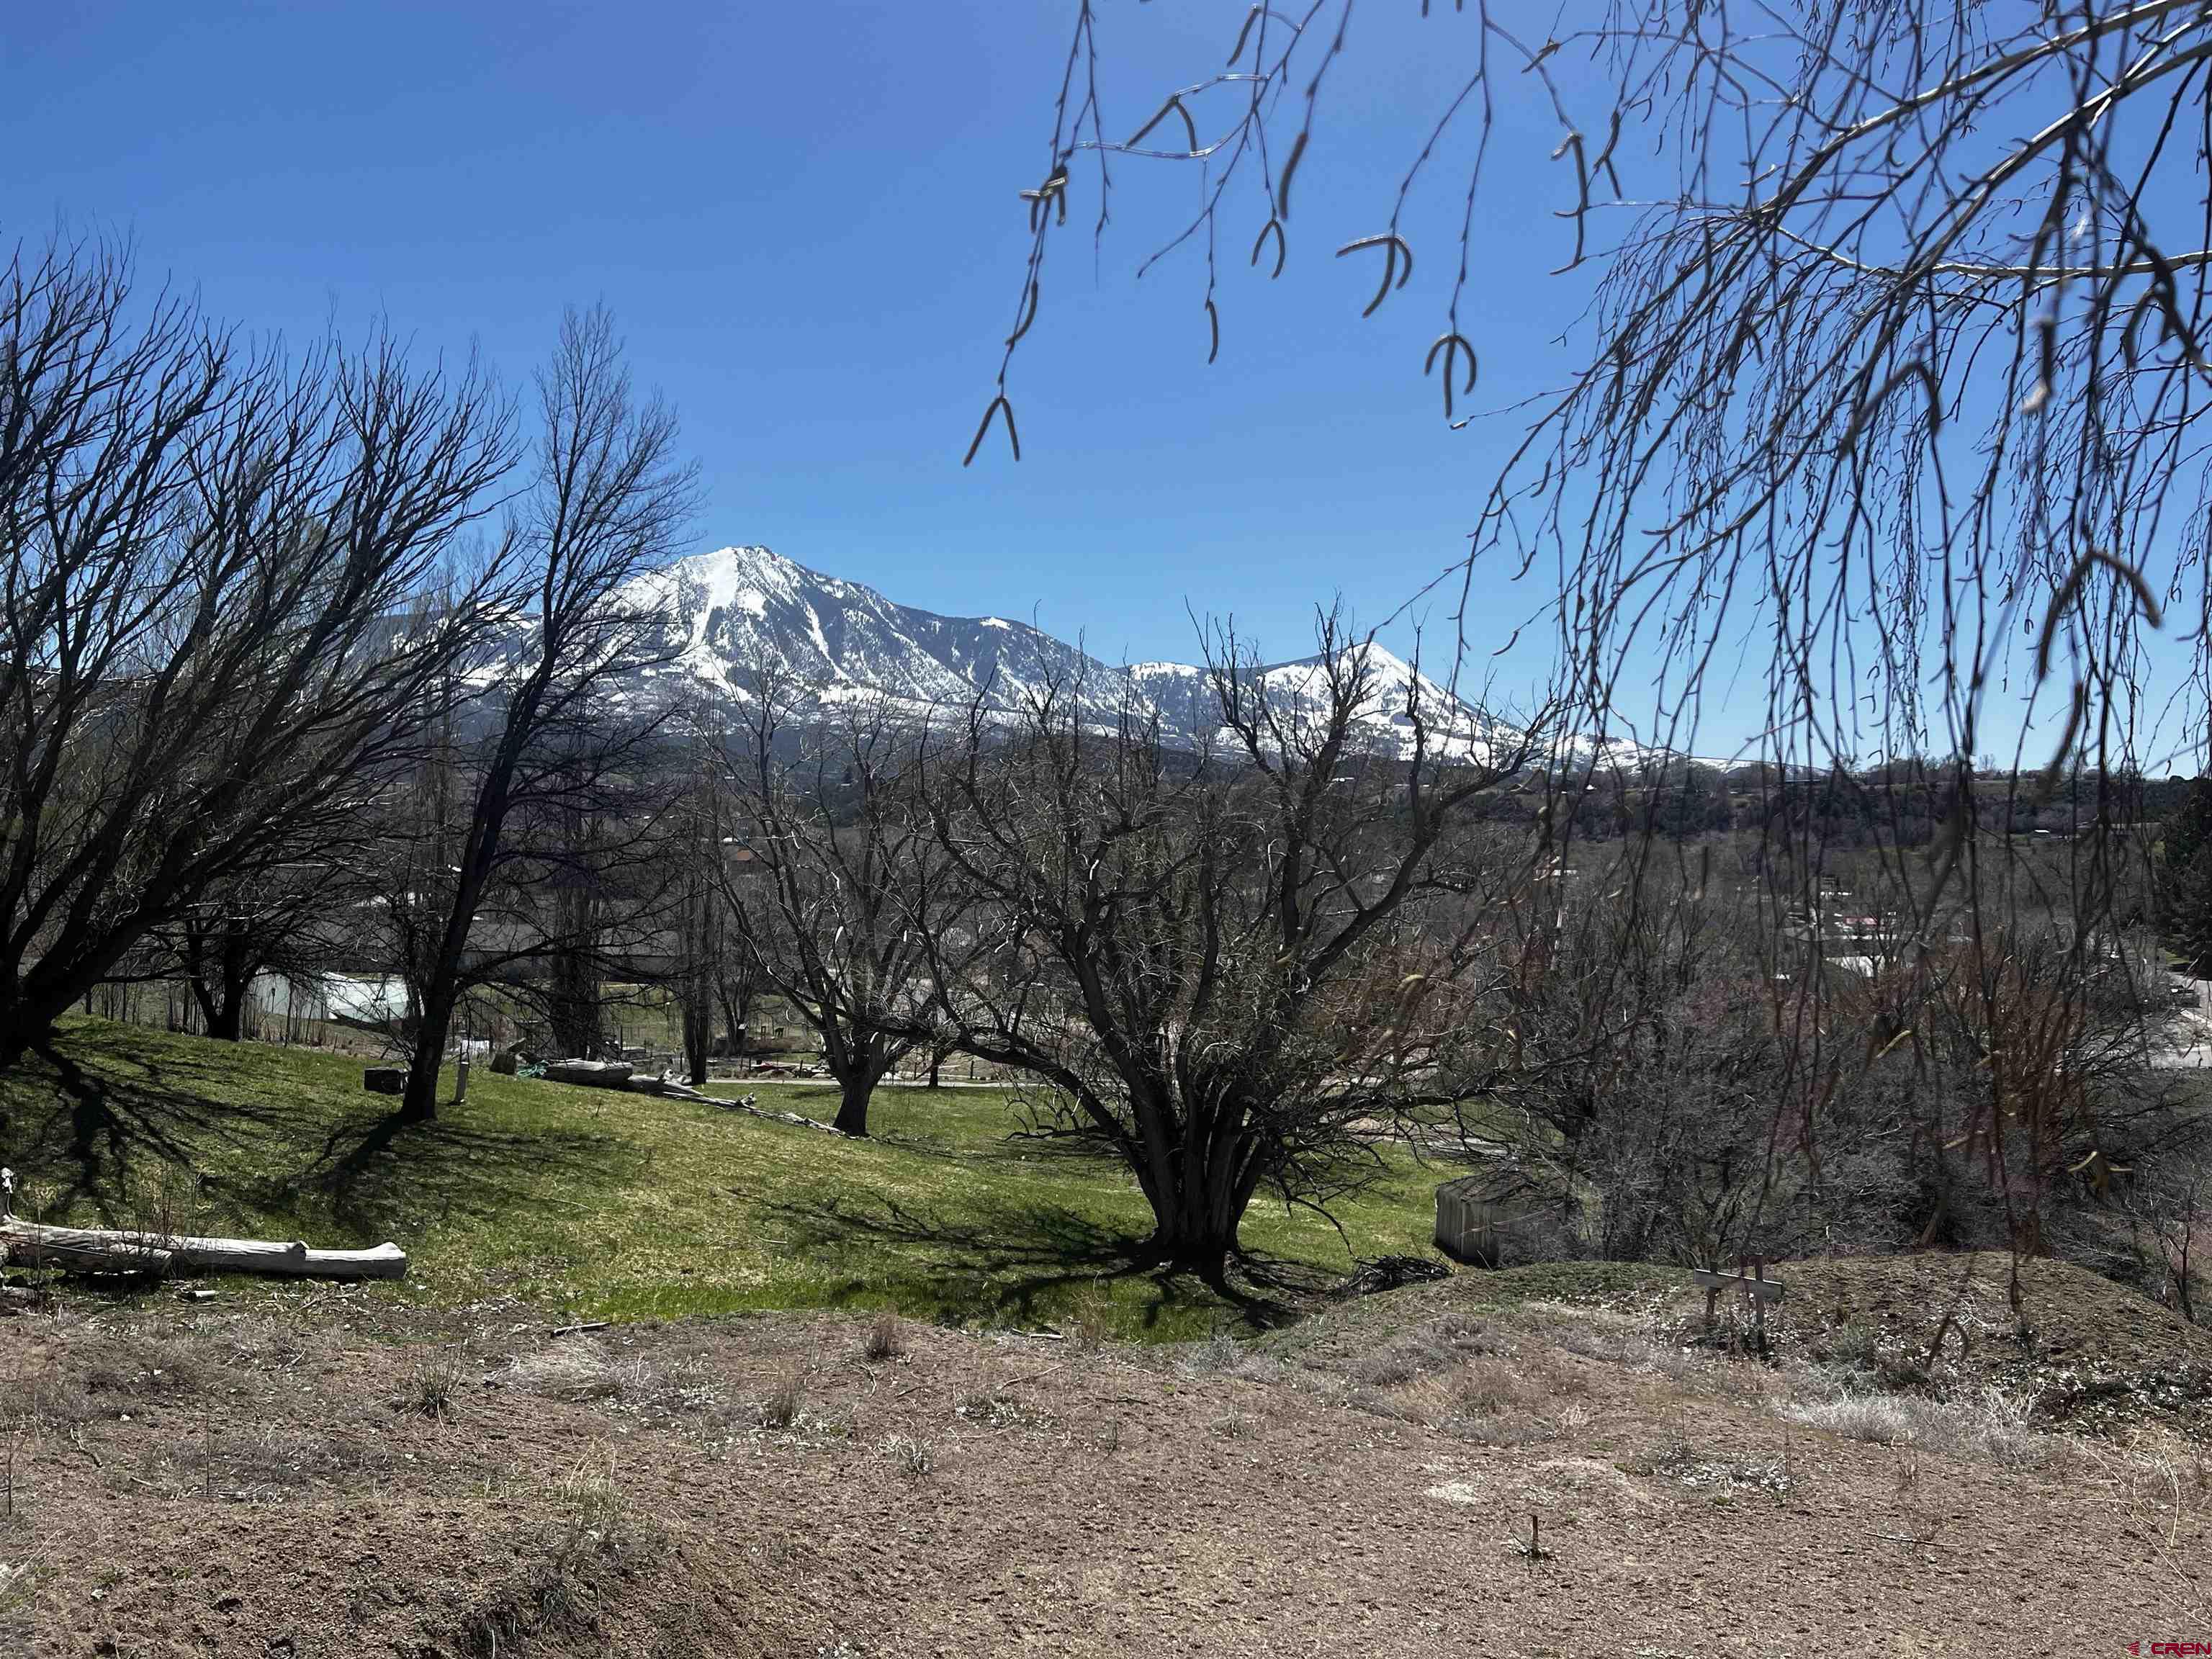 Spectacular Views of the Valley and Mt. Lamborn. Ideal building lot with a coveted Town of Paonia Water and Sewer Tap in the Apple Valley Neighborhood, the gateway to Mt Jumbo trails for biking, hiking and horseback riding. This south facing lot sits at the end of a quiet cul-de-sac in the  Apple Valley Subdivision which also provides irrigation water via the HOA. Direct access to Apple Valley Park runs along Minnesota Creek, offering Pickleball/Tennis Courts, Parcourse, Frisbee Golf, and a Playground. It's nearby the Mountain Oven Bakery for your Friday morning Pastry pick up and coffee as well as a close walk to downtown Paonia.